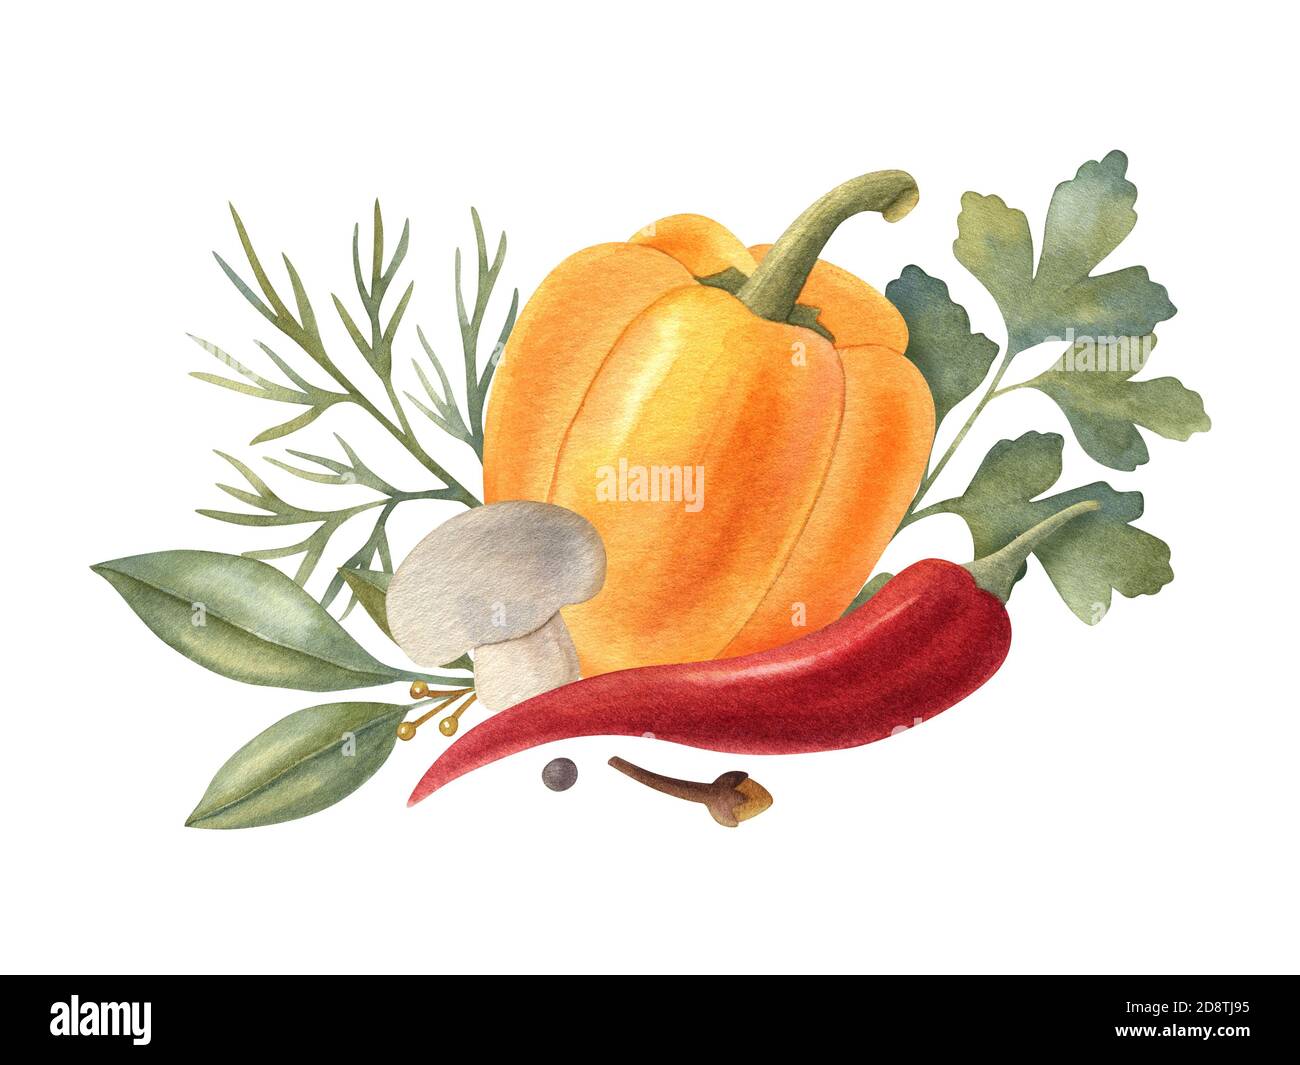 Watercolor vegetable composition with herbs, yellow bell pepper, mushroom, and red chili. A bright illustration of healthy fresh food. Stock Photo